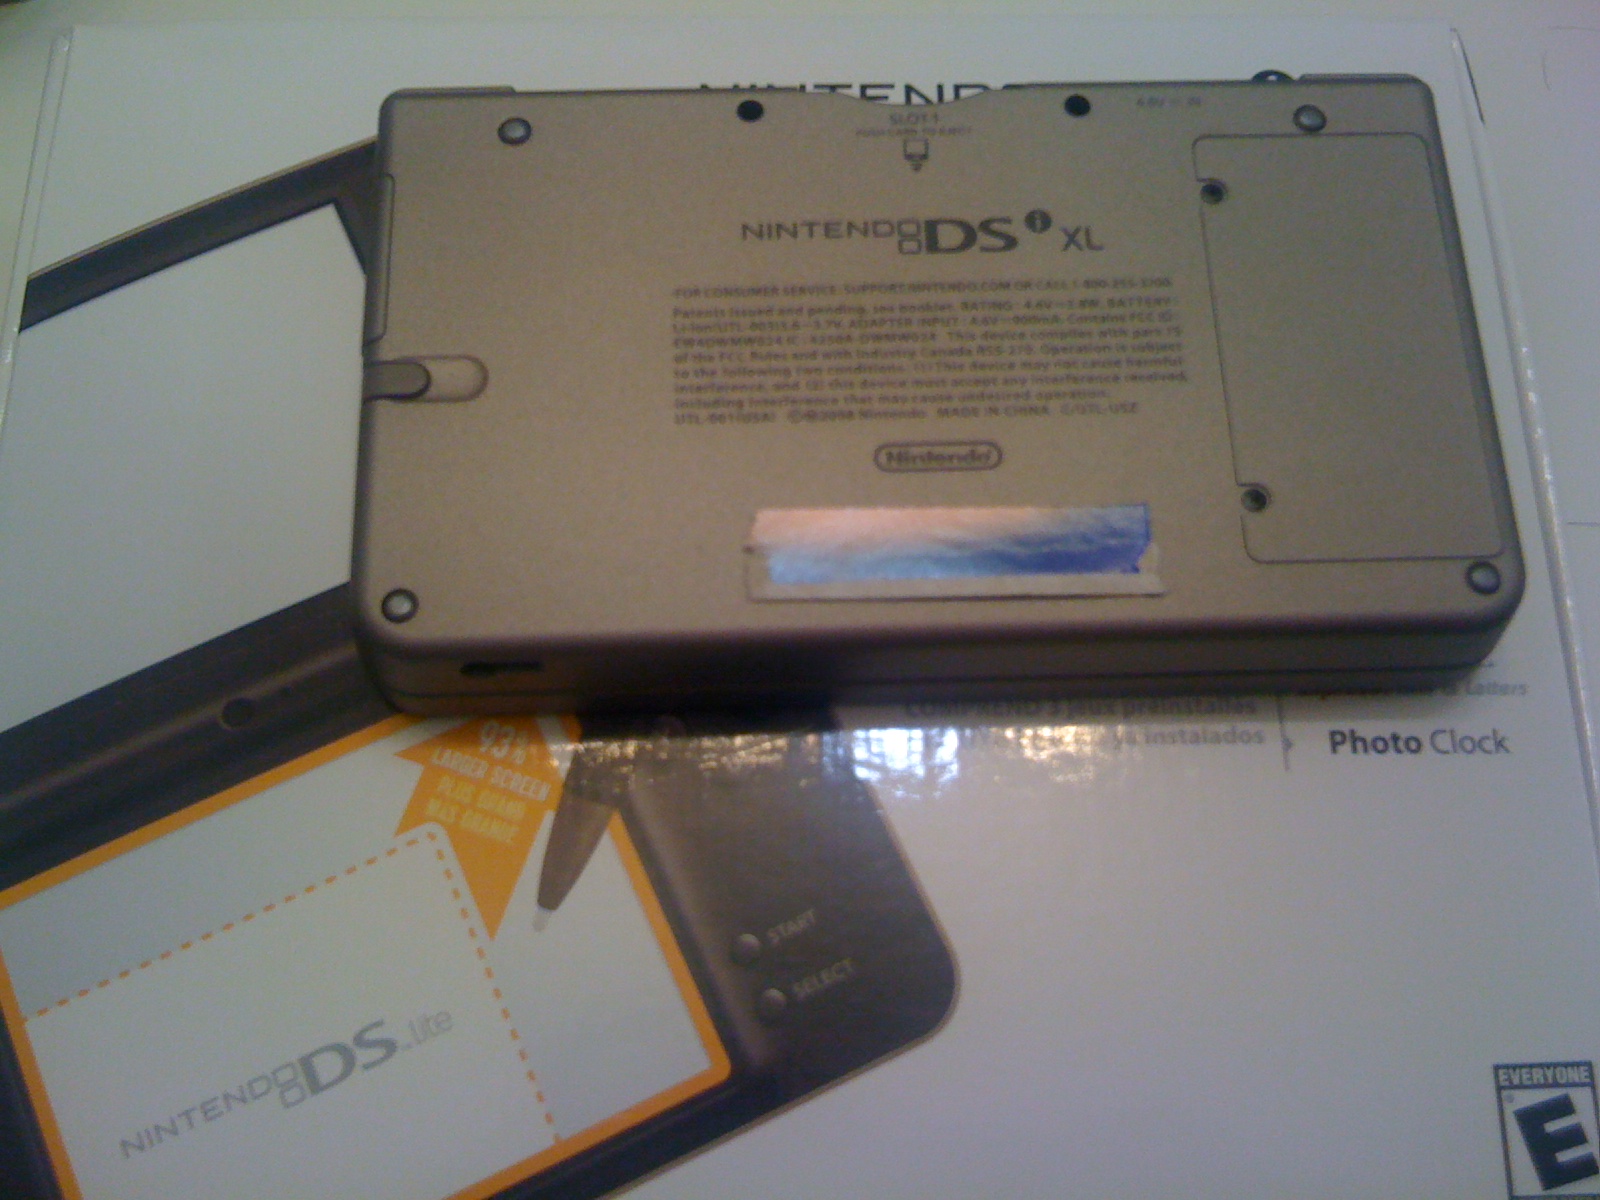 DSi XL Review; The Good & The Bad